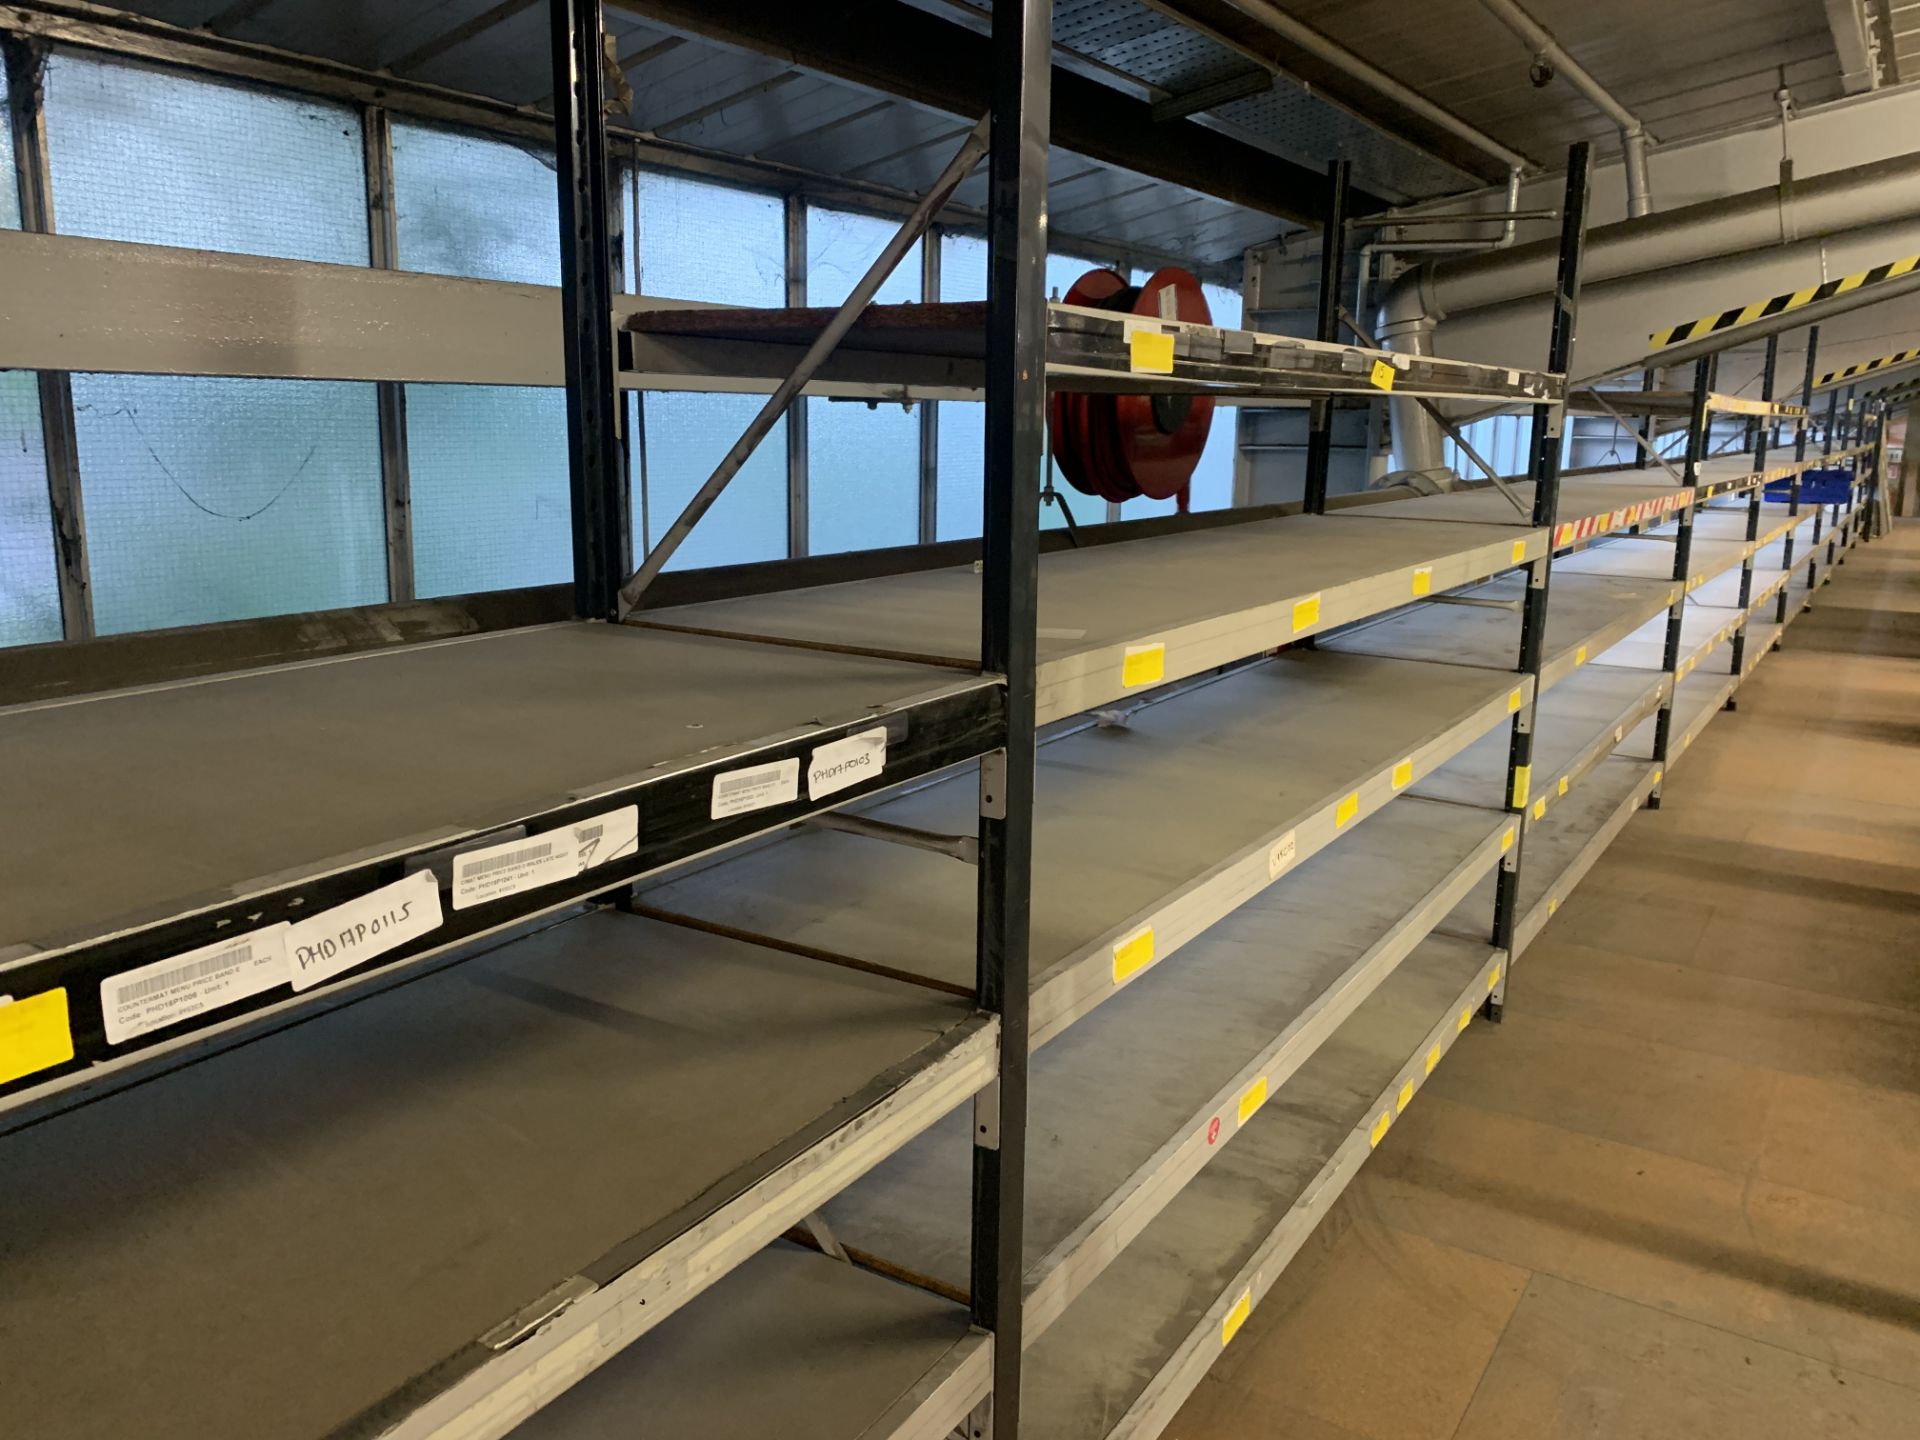 13 BAYS OF WAREHOUSE RACKING TO INCLUDE 14 UPRIGHTS & APPROX. 120 CROSS BEAMS. EACH BAY IS APPROX.